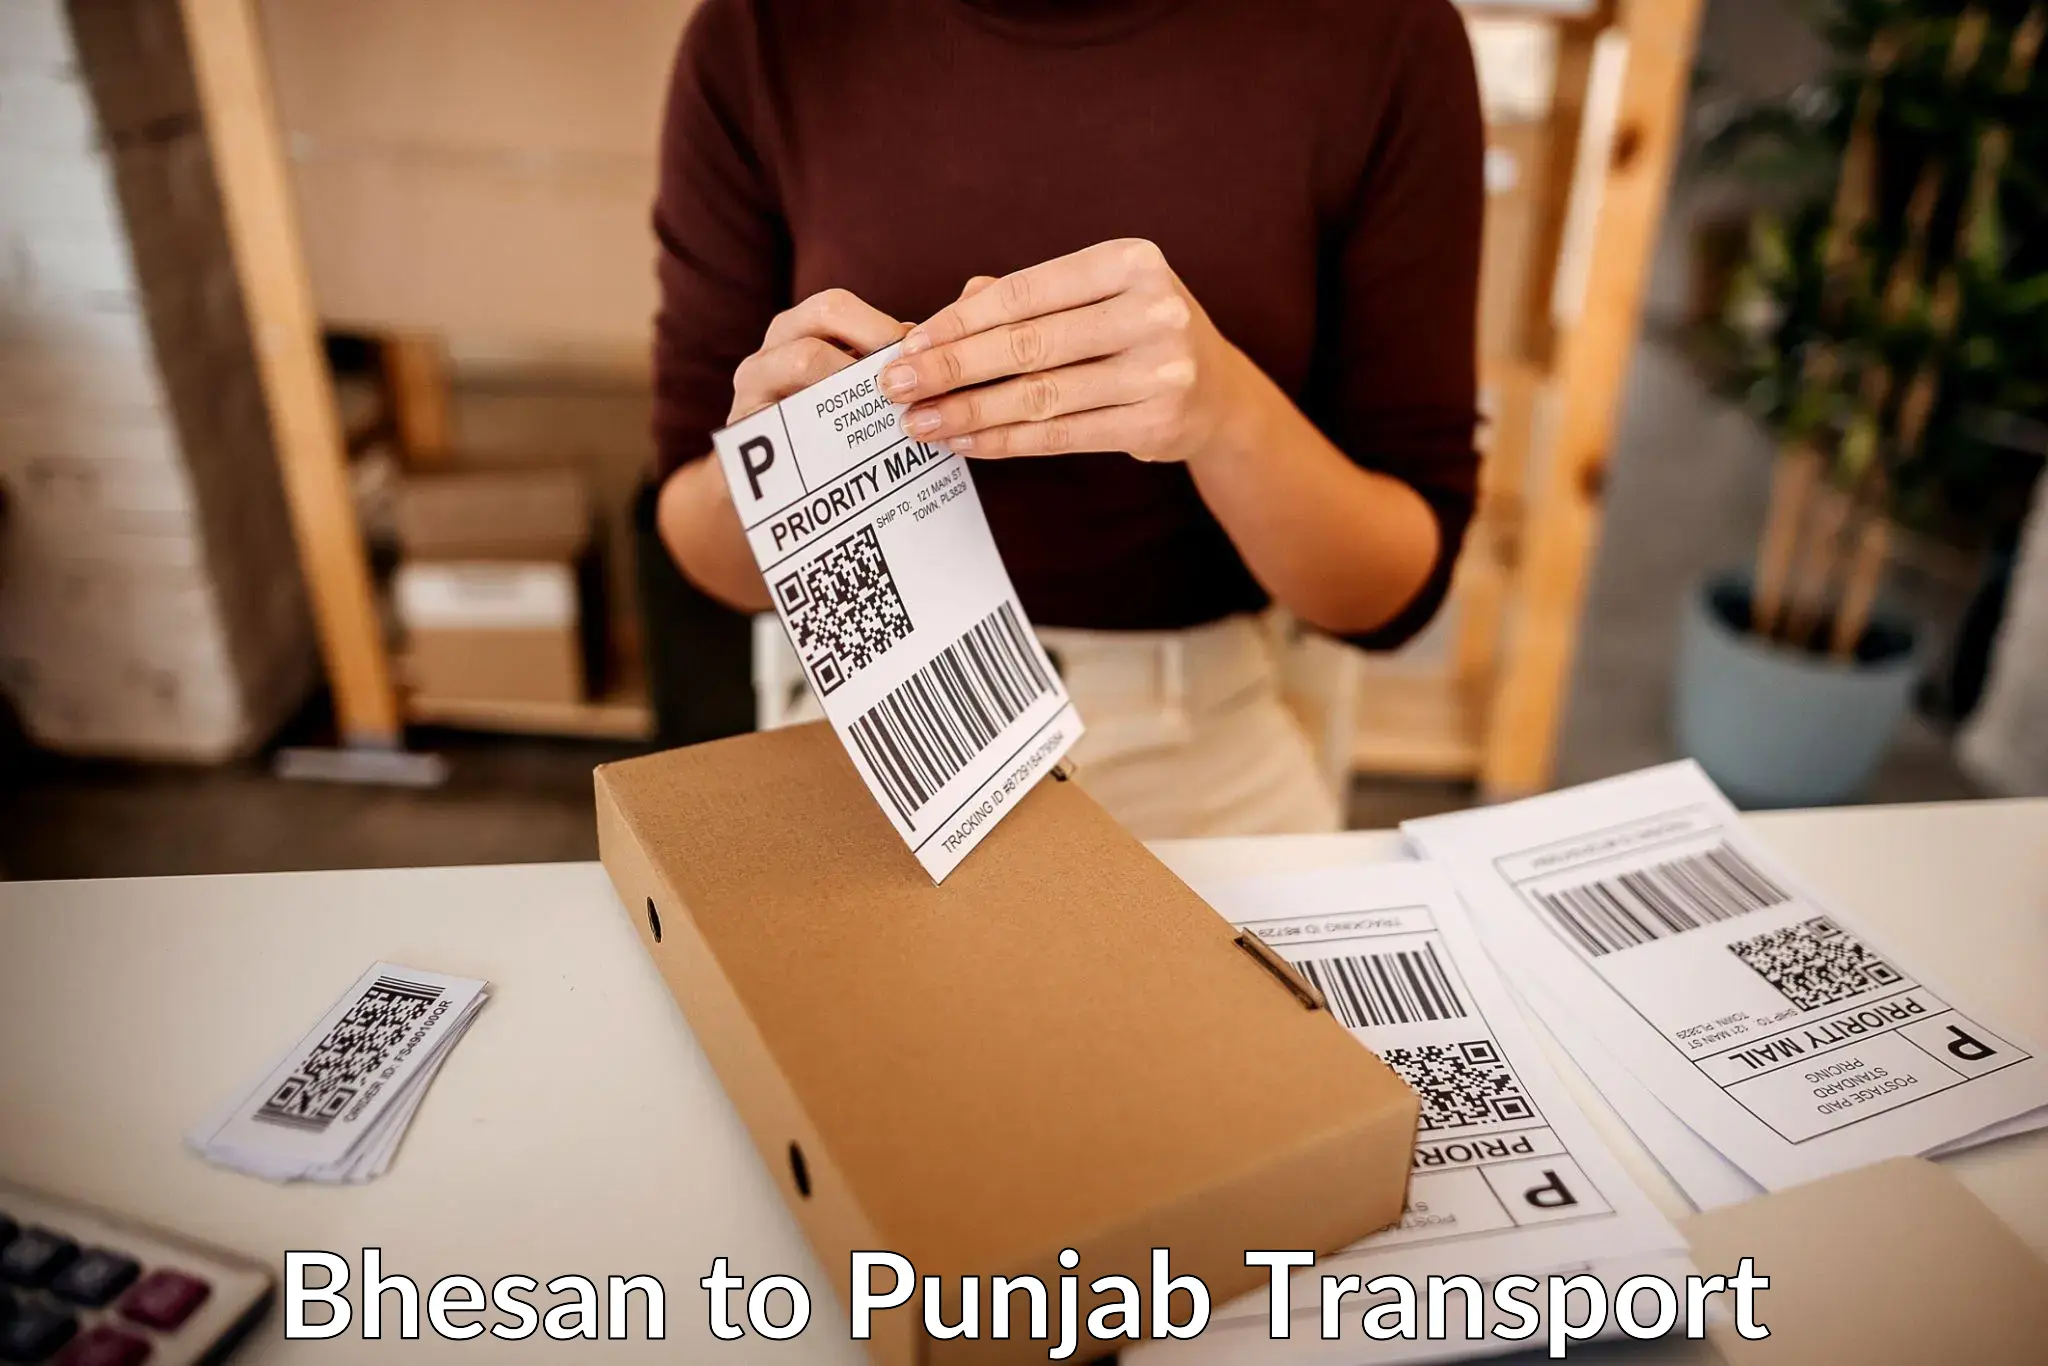 Goods delivery service Bhesan to Mansa